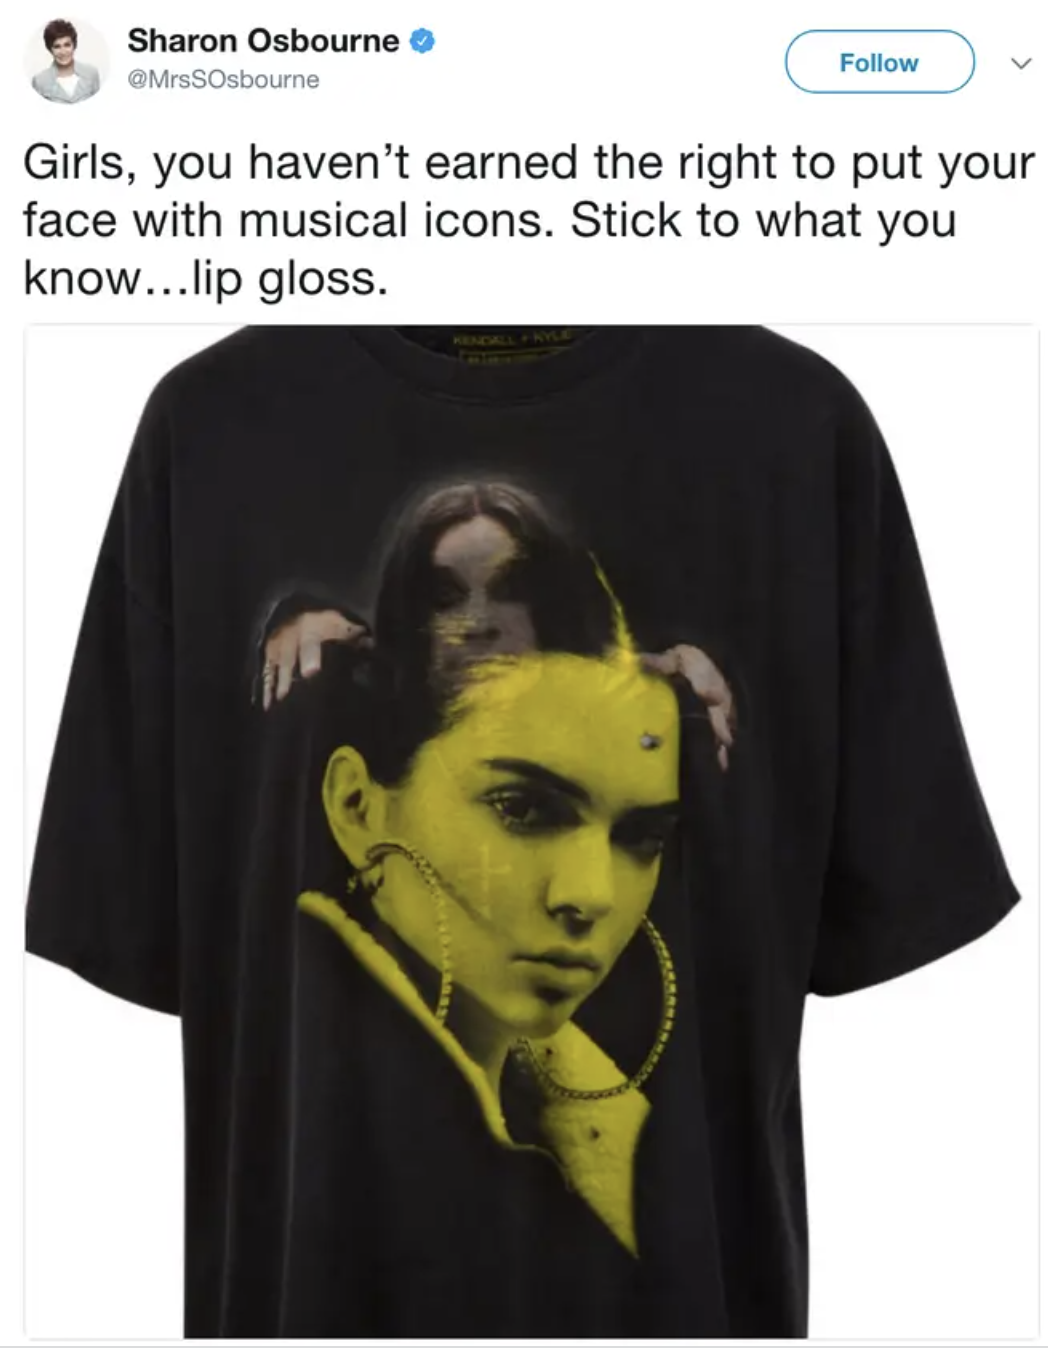 A tweet from Sharon Osborne with a photo of a tshirt featuring Kendall Jenner&#x27;s face superimposed over Ozzy Osbourne&#x27;s